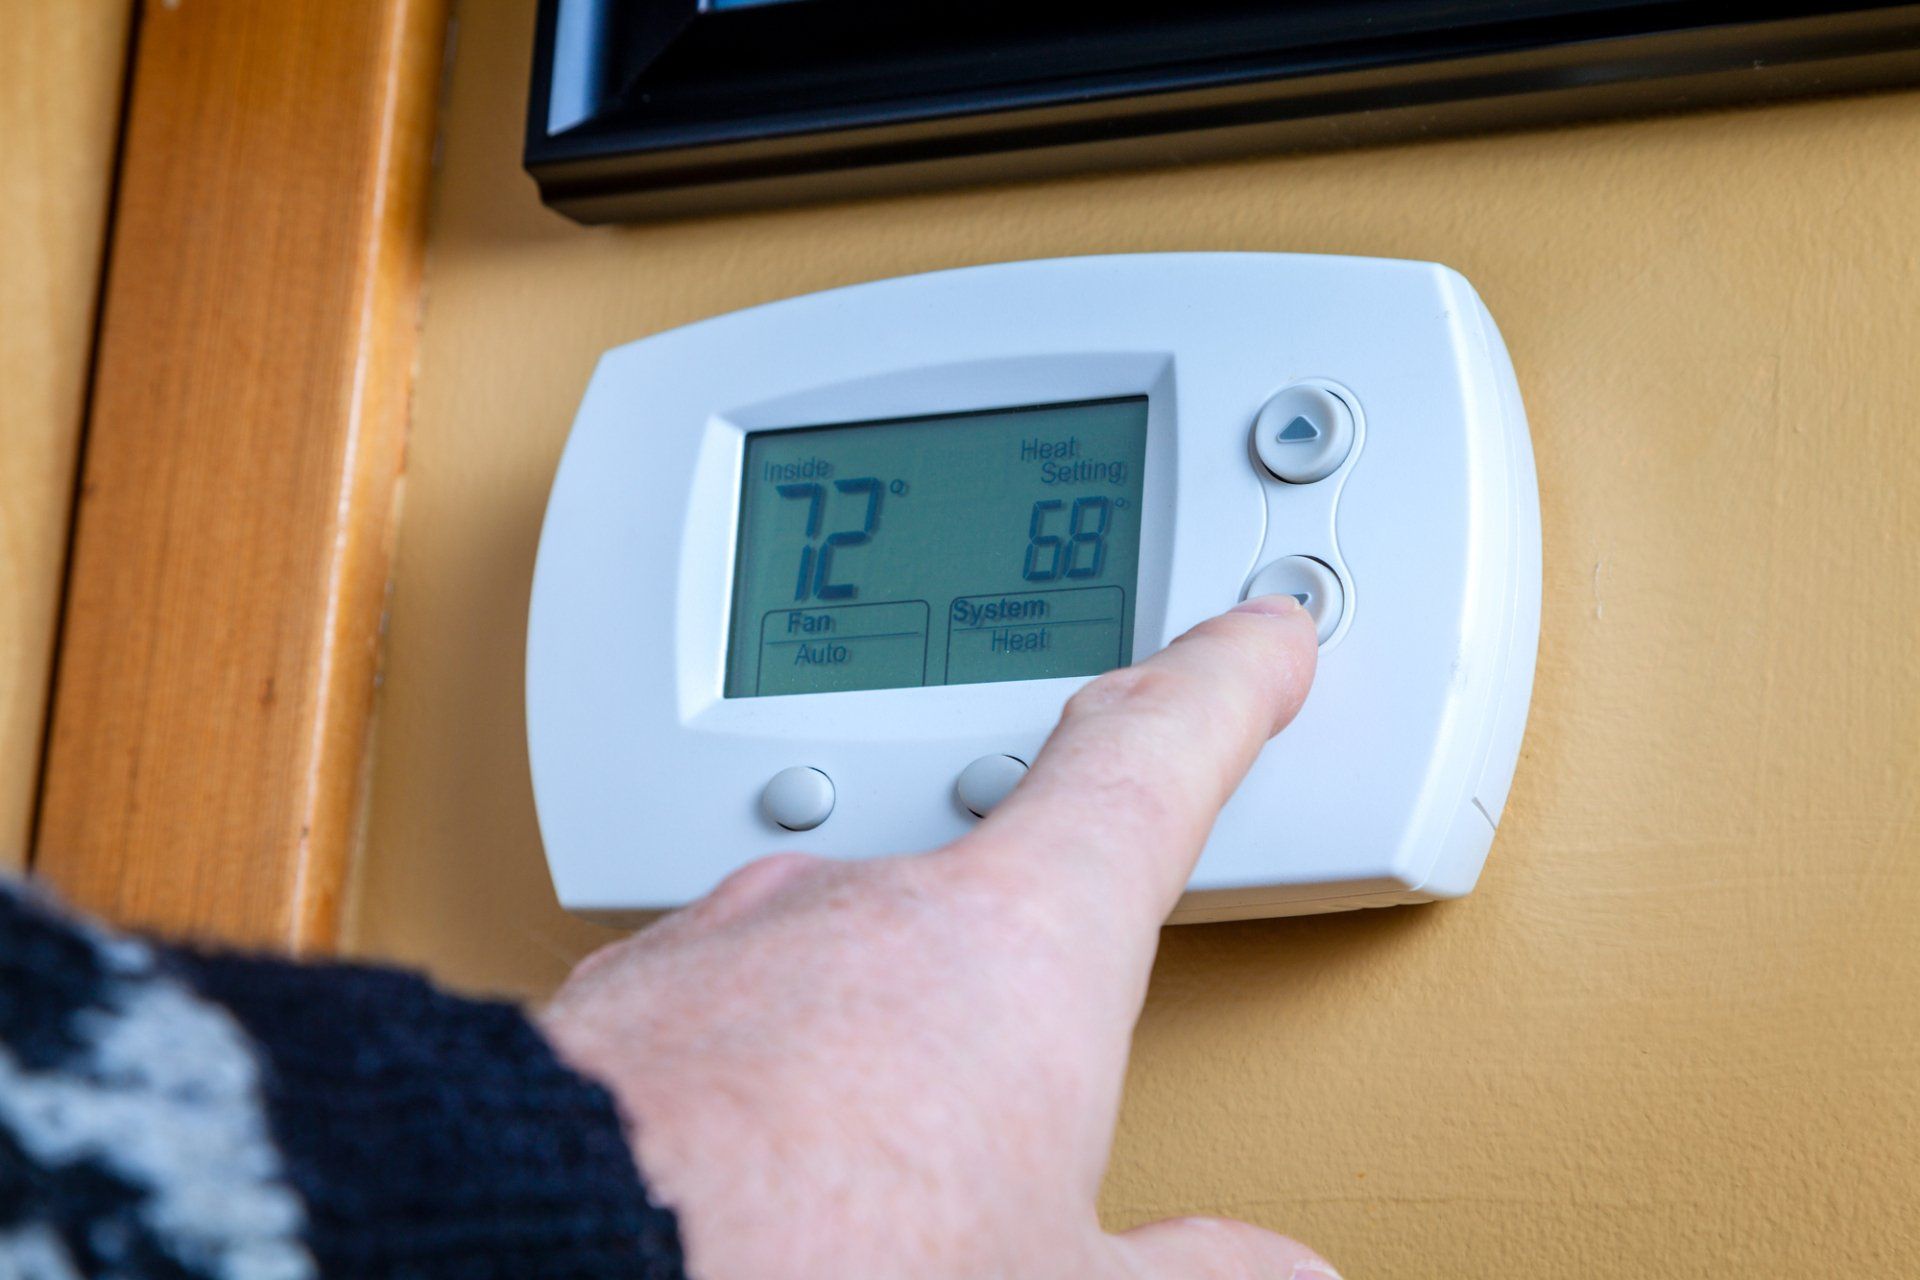 How To Turn On My Honeywell Thermostat Honeywell Thermostat Troubleshooting Tips